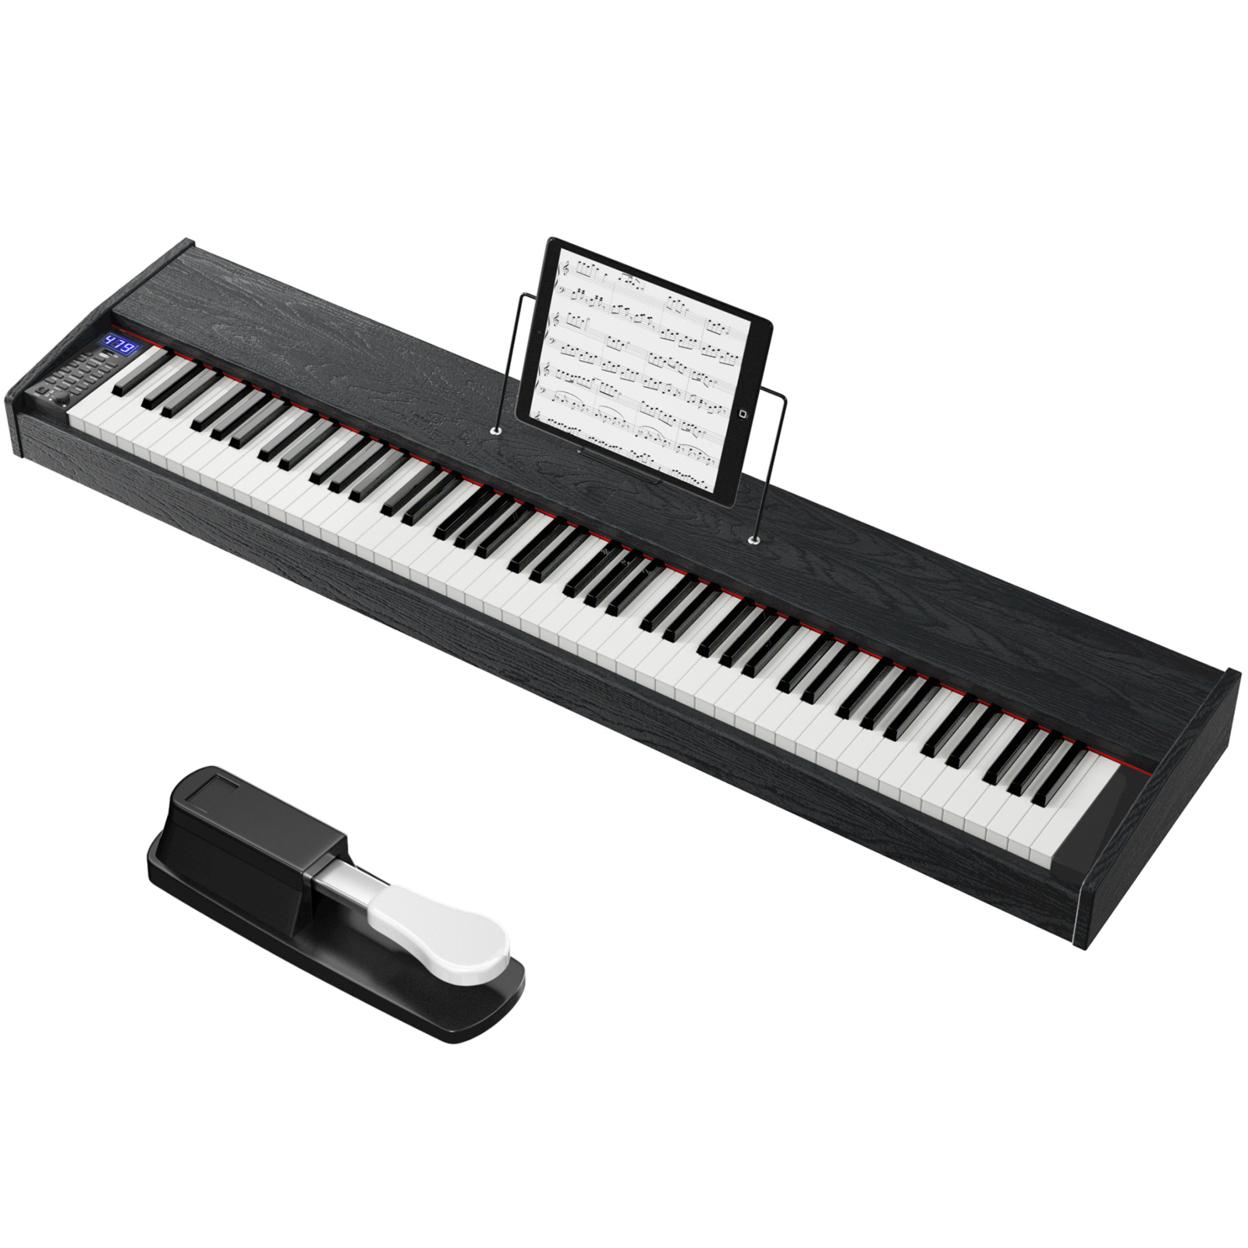 88-Key Full Size Digital Piano Weighted Keyboard W/ Sustain Pedal Black/White - White